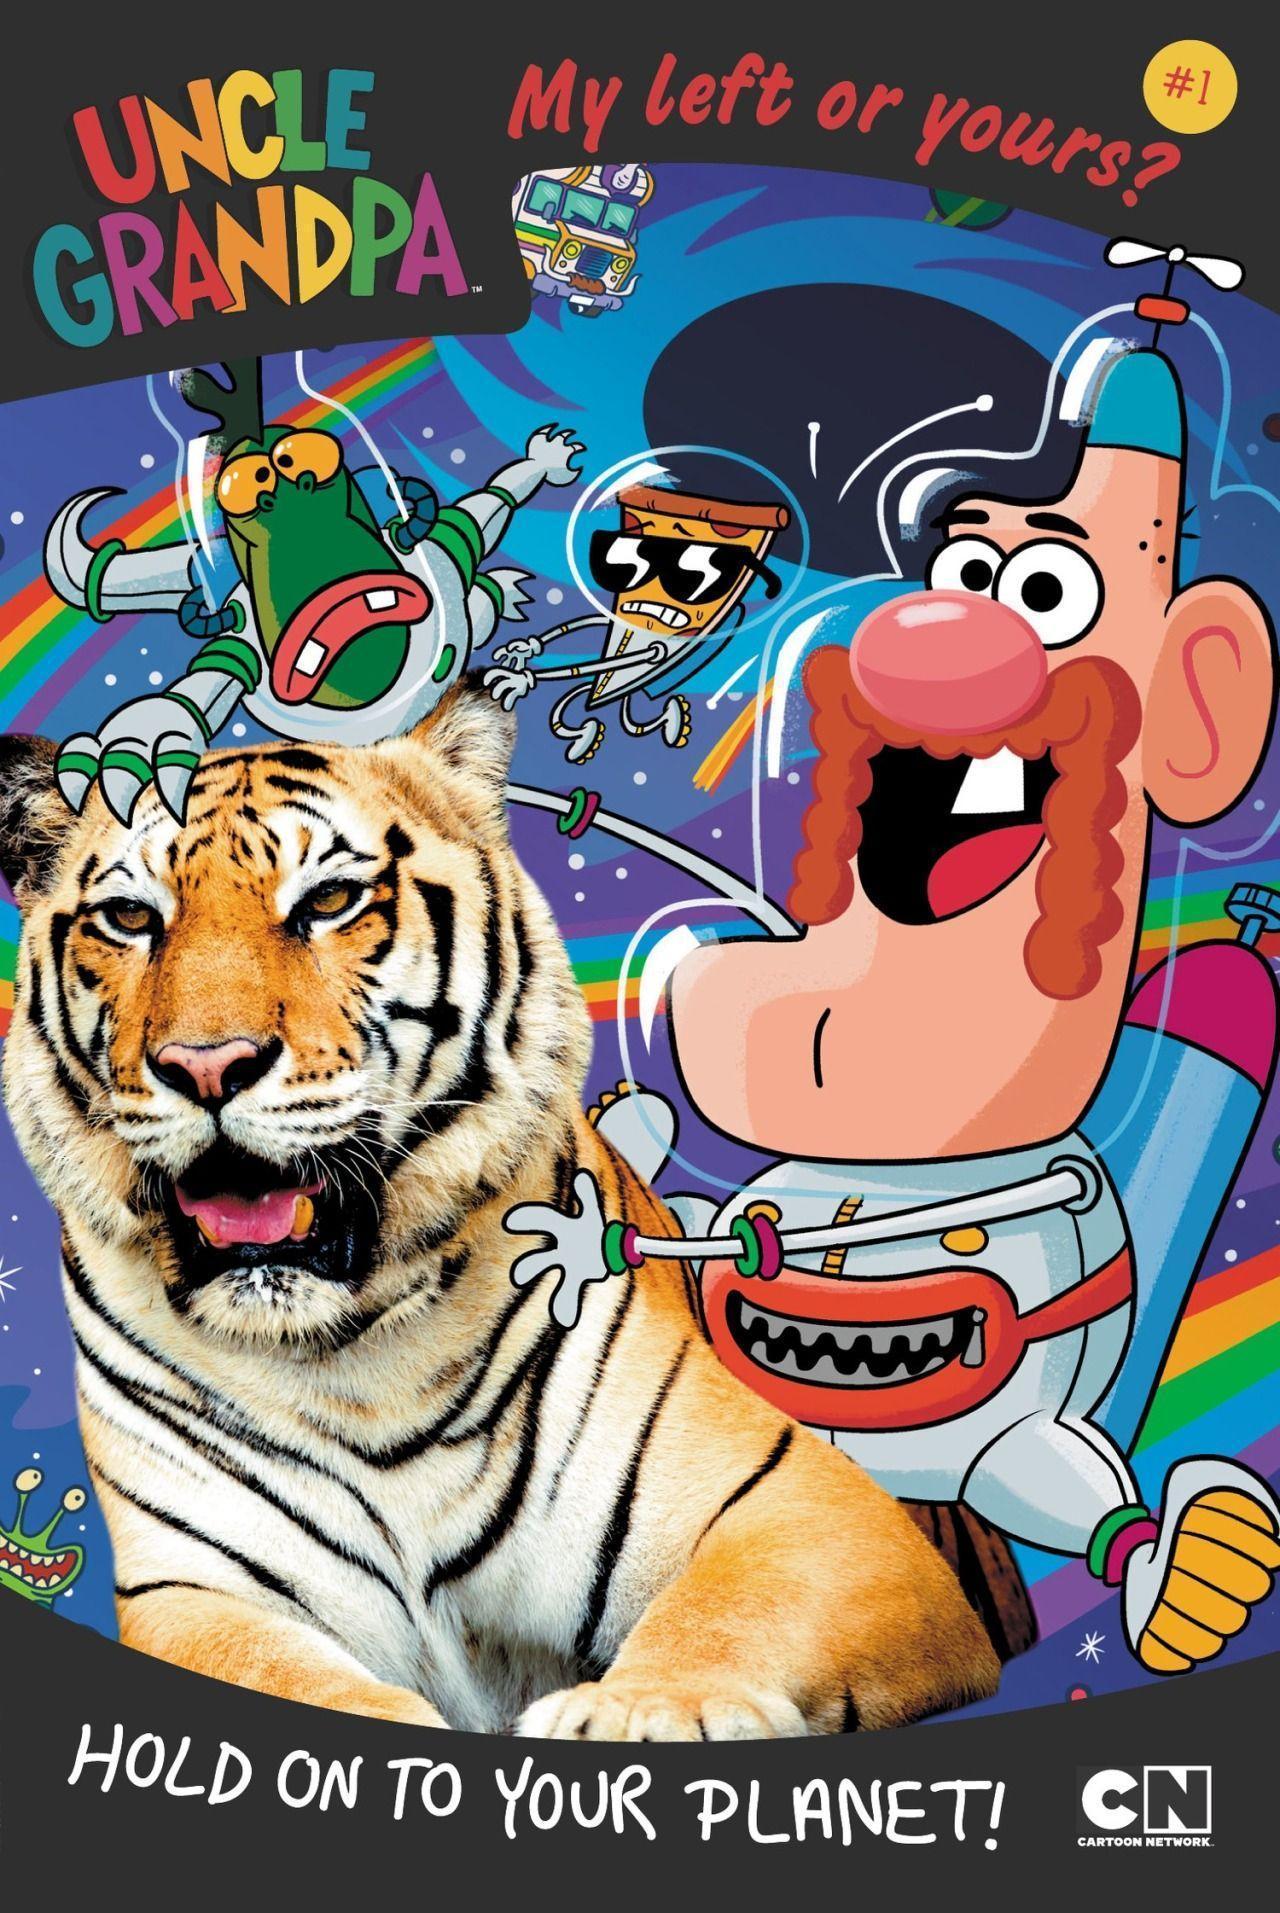 Everybody's favorite uncle and grandpa. Uncle Grandpa. Cartoon